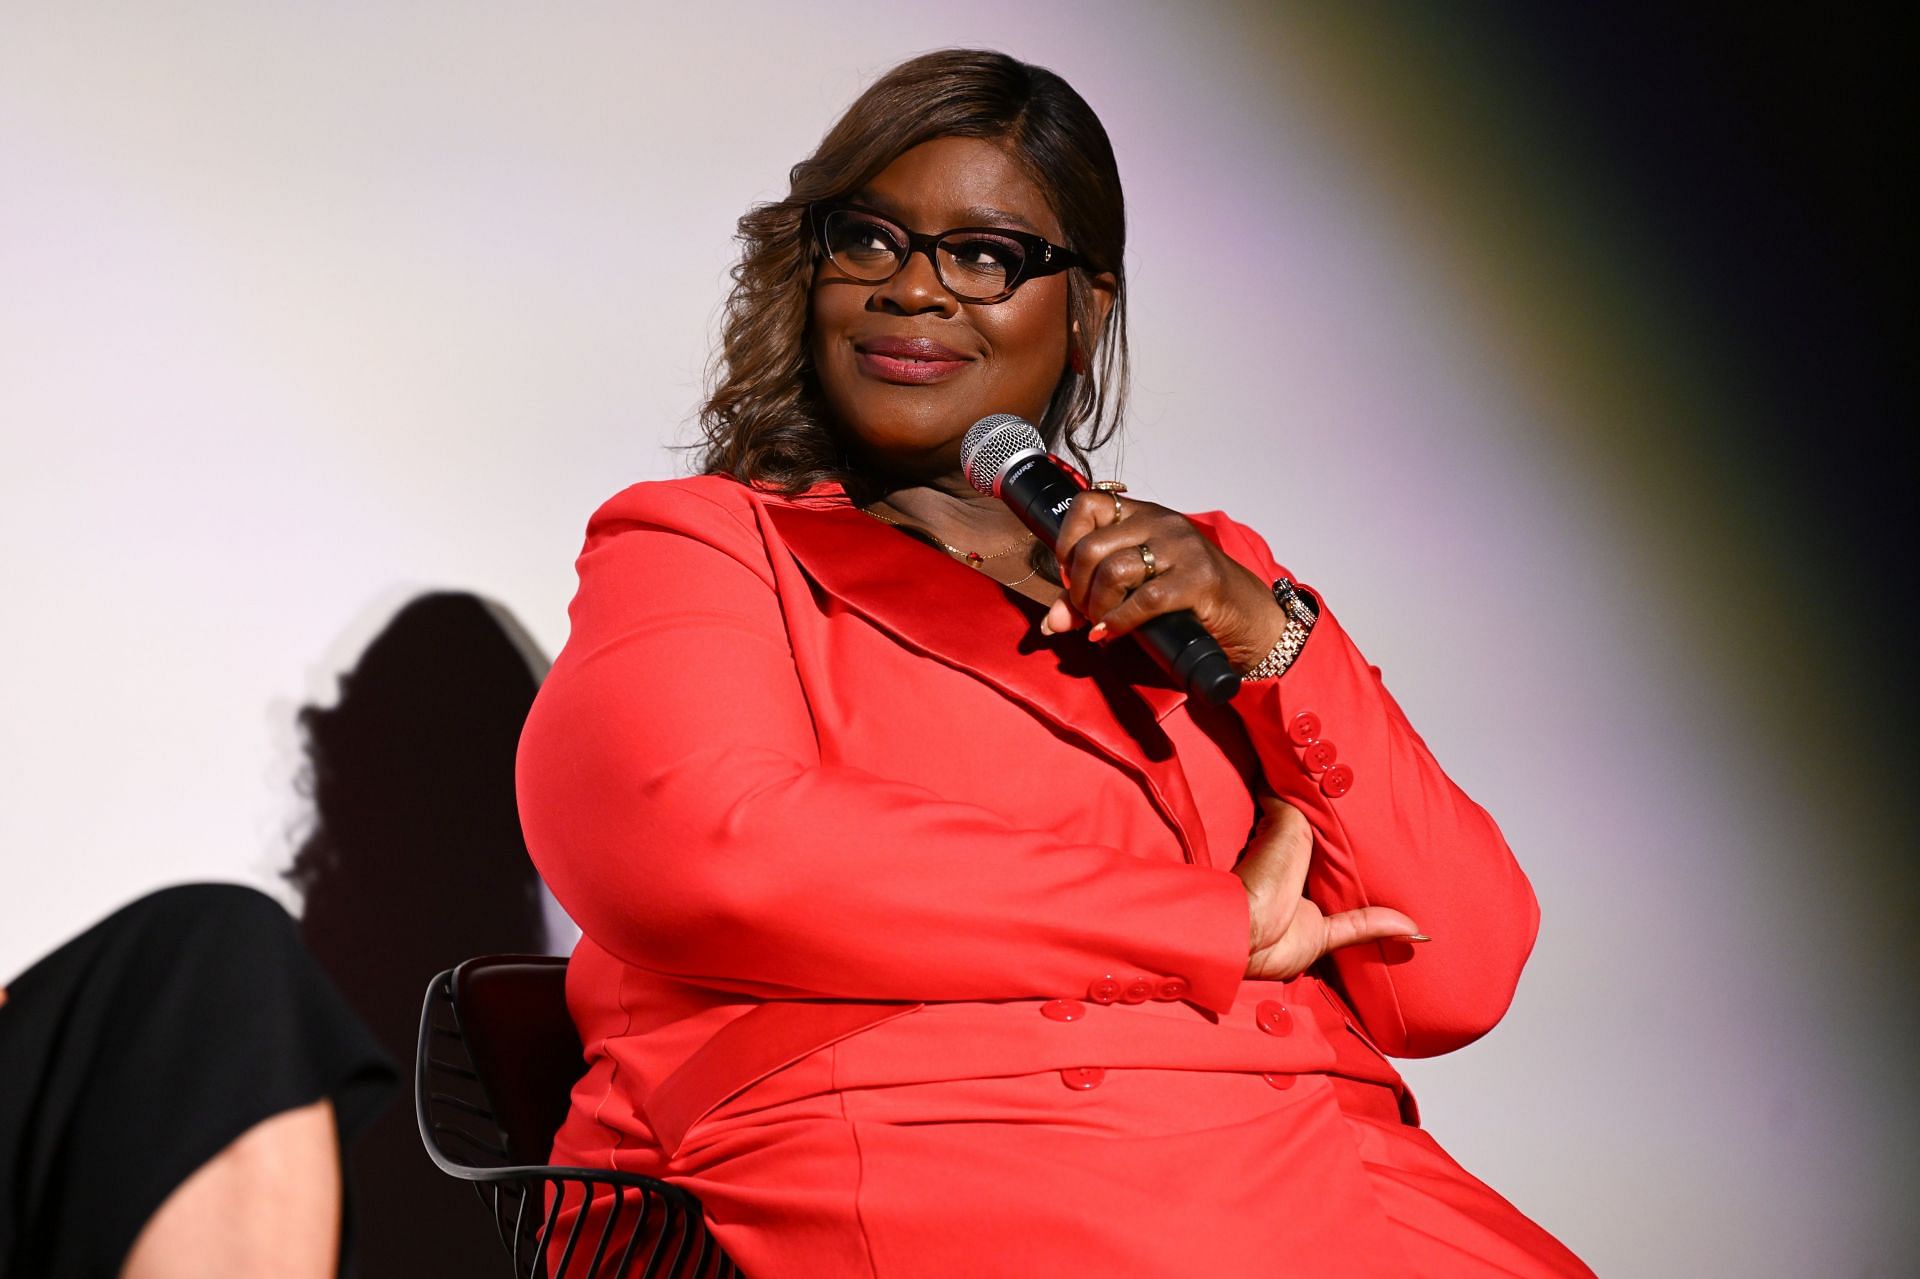 Retta stars as Claudette in this film (Photo by Bryan Bedder/Getty Images for Netflix)